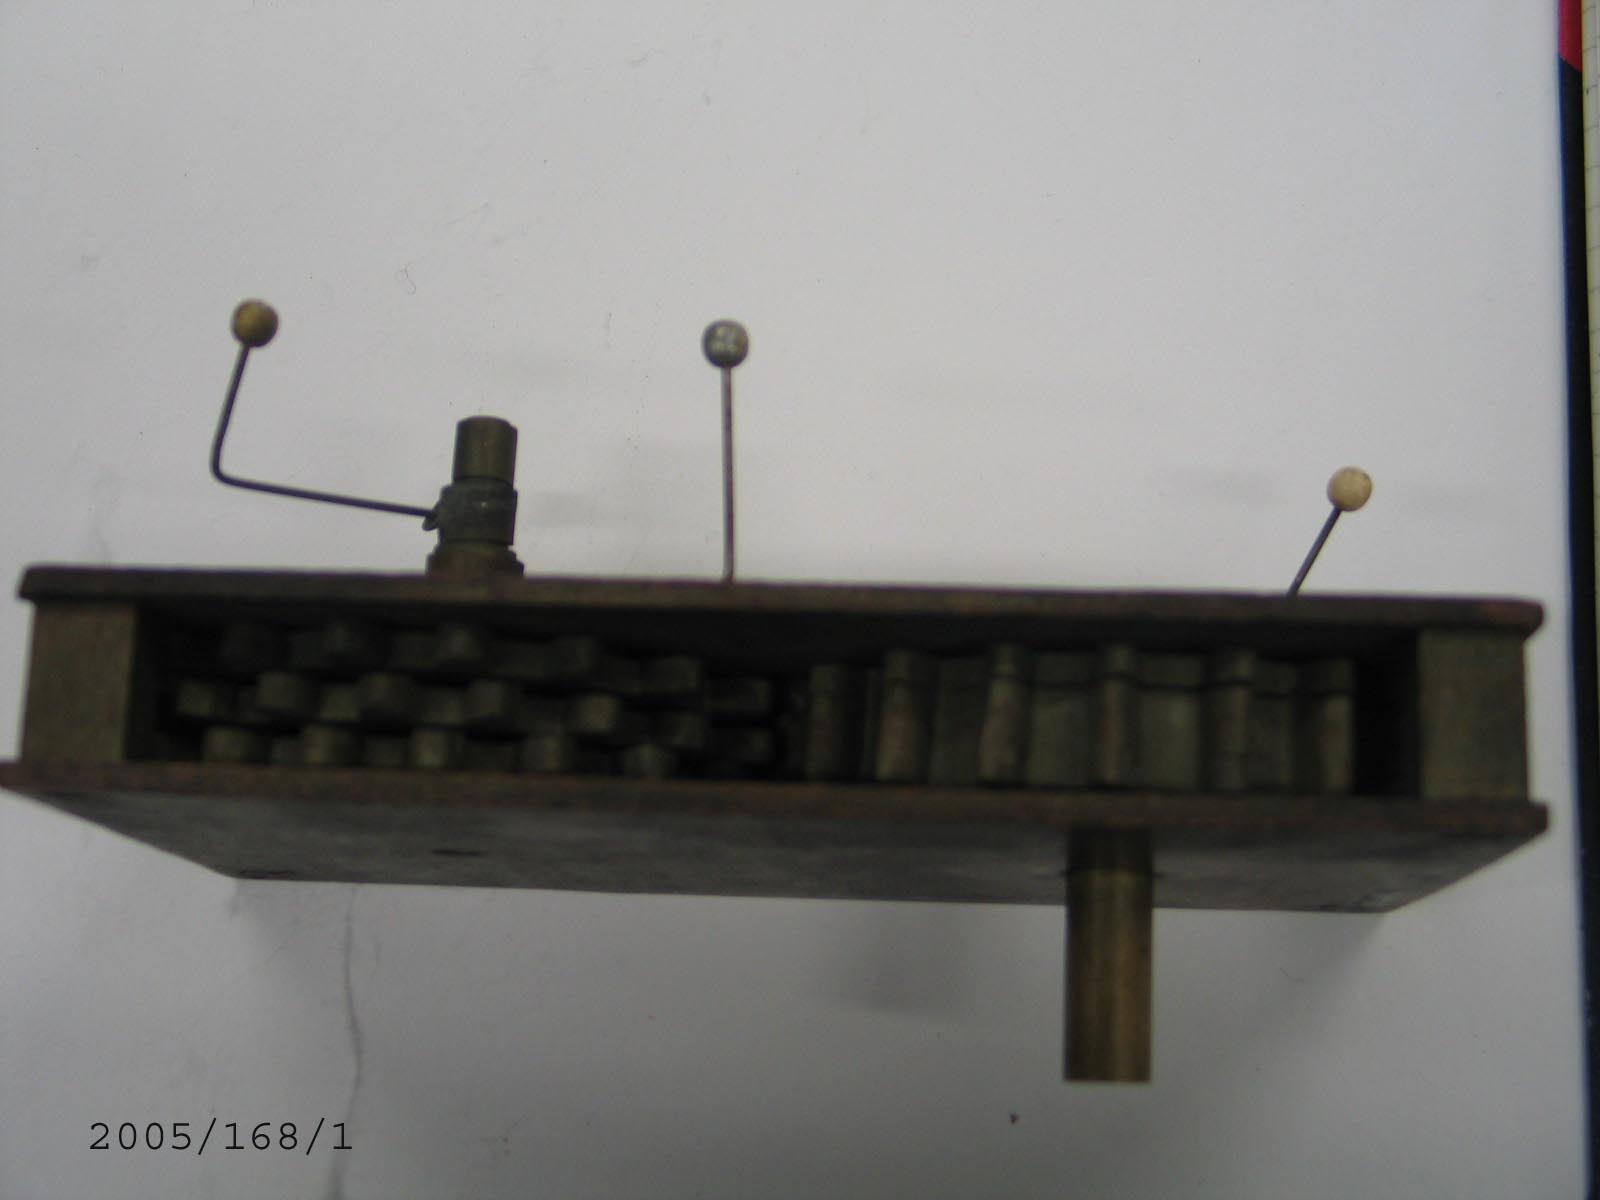 Mechanical paradox with orrery